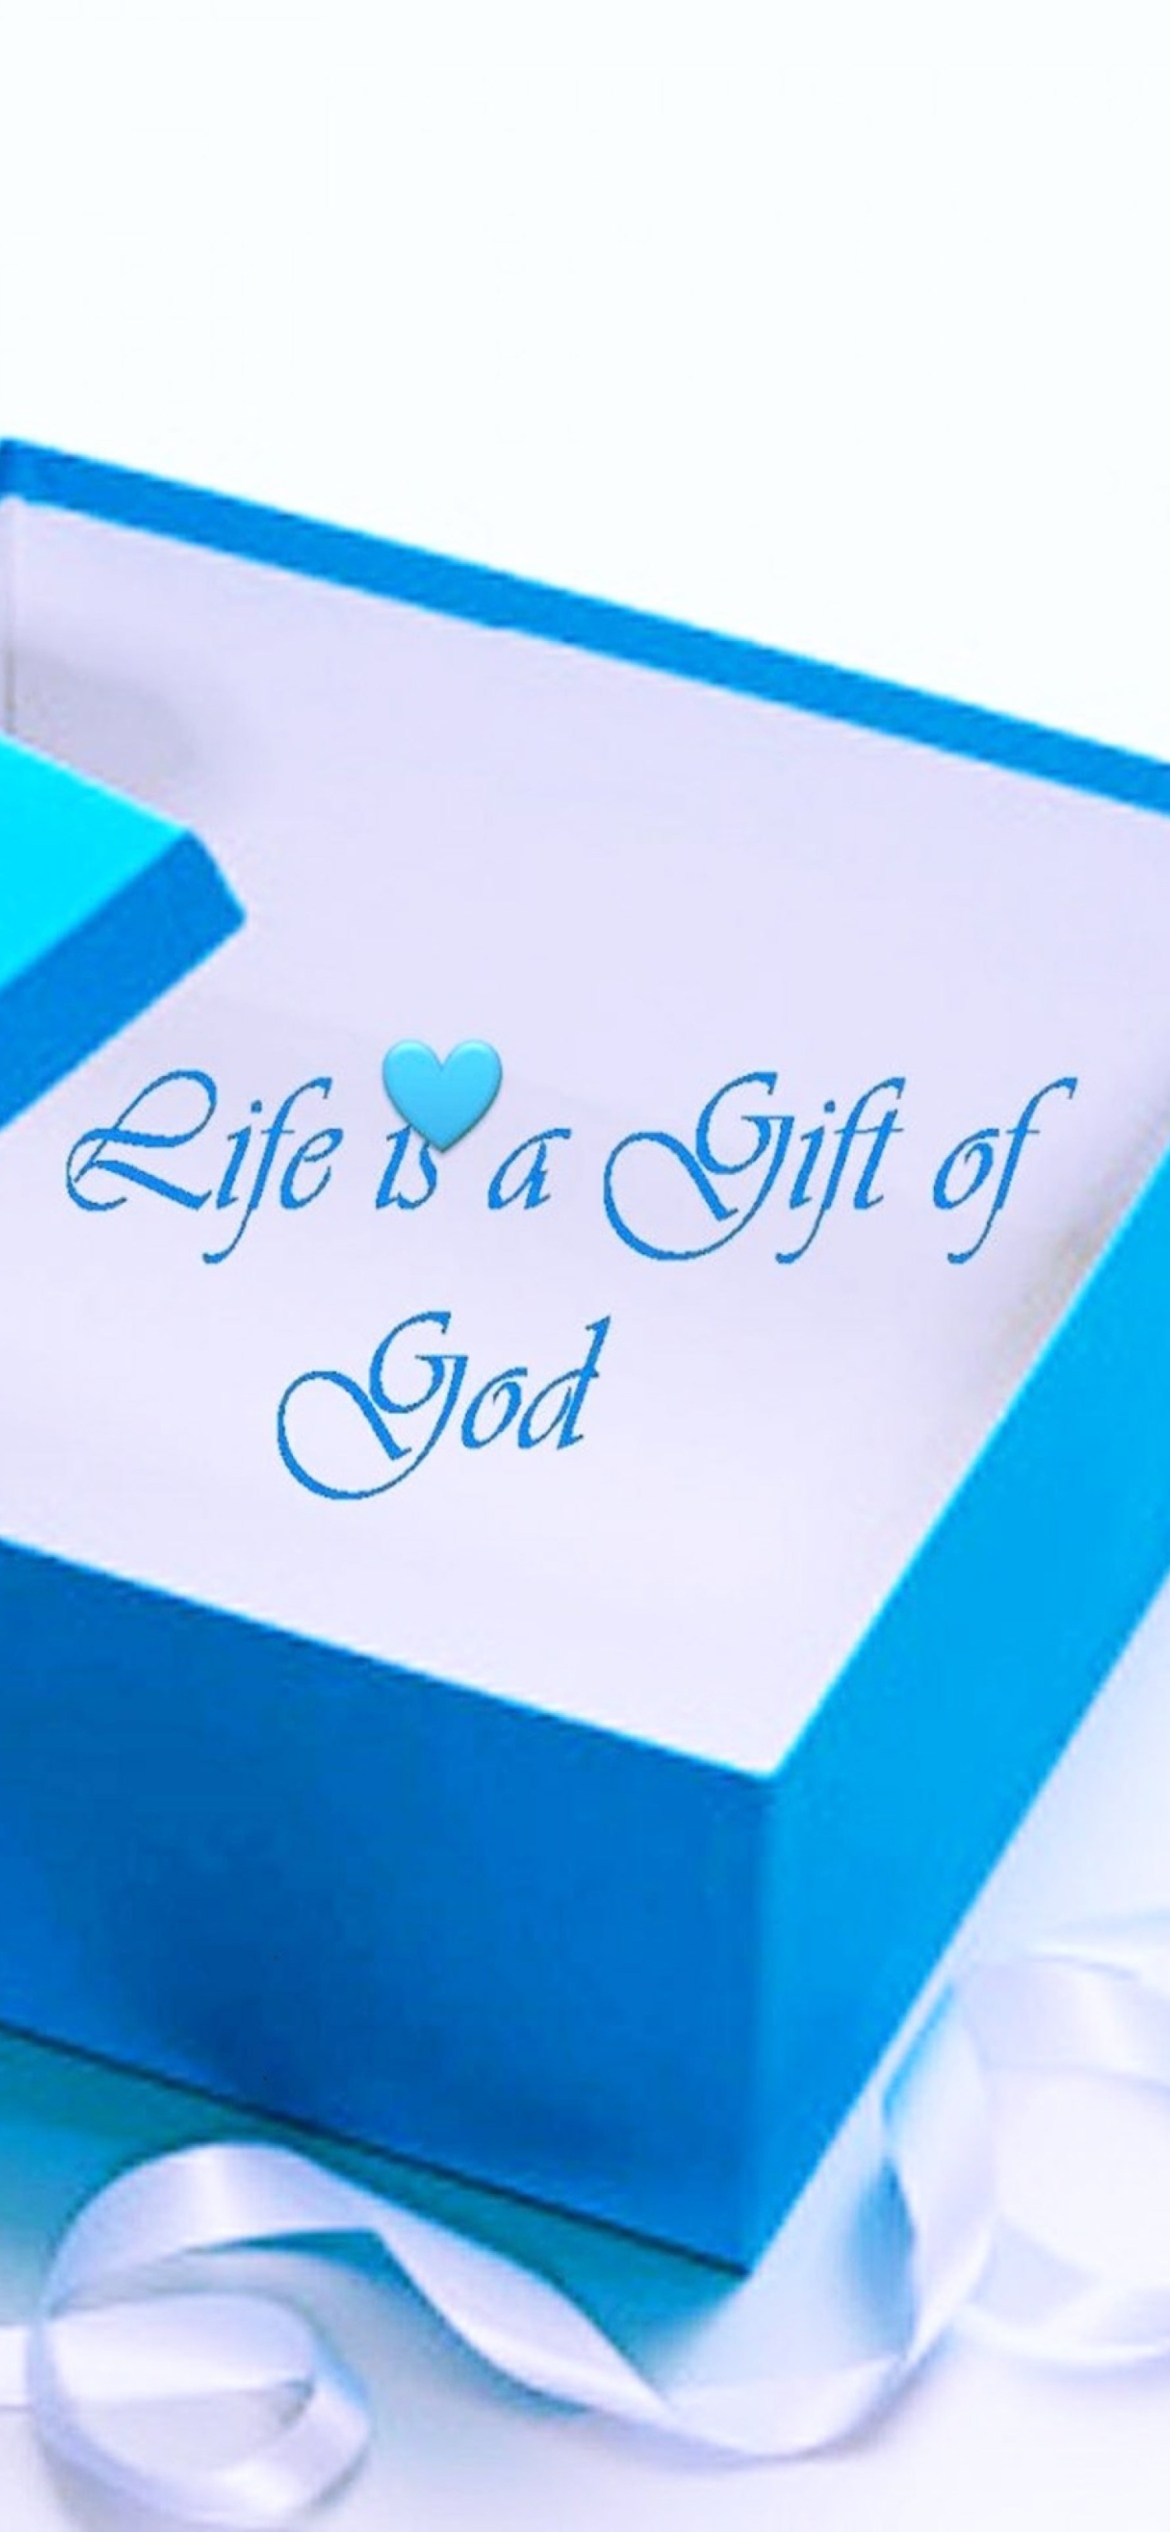 Life Is Gift Of God wallpaper 1170x2532